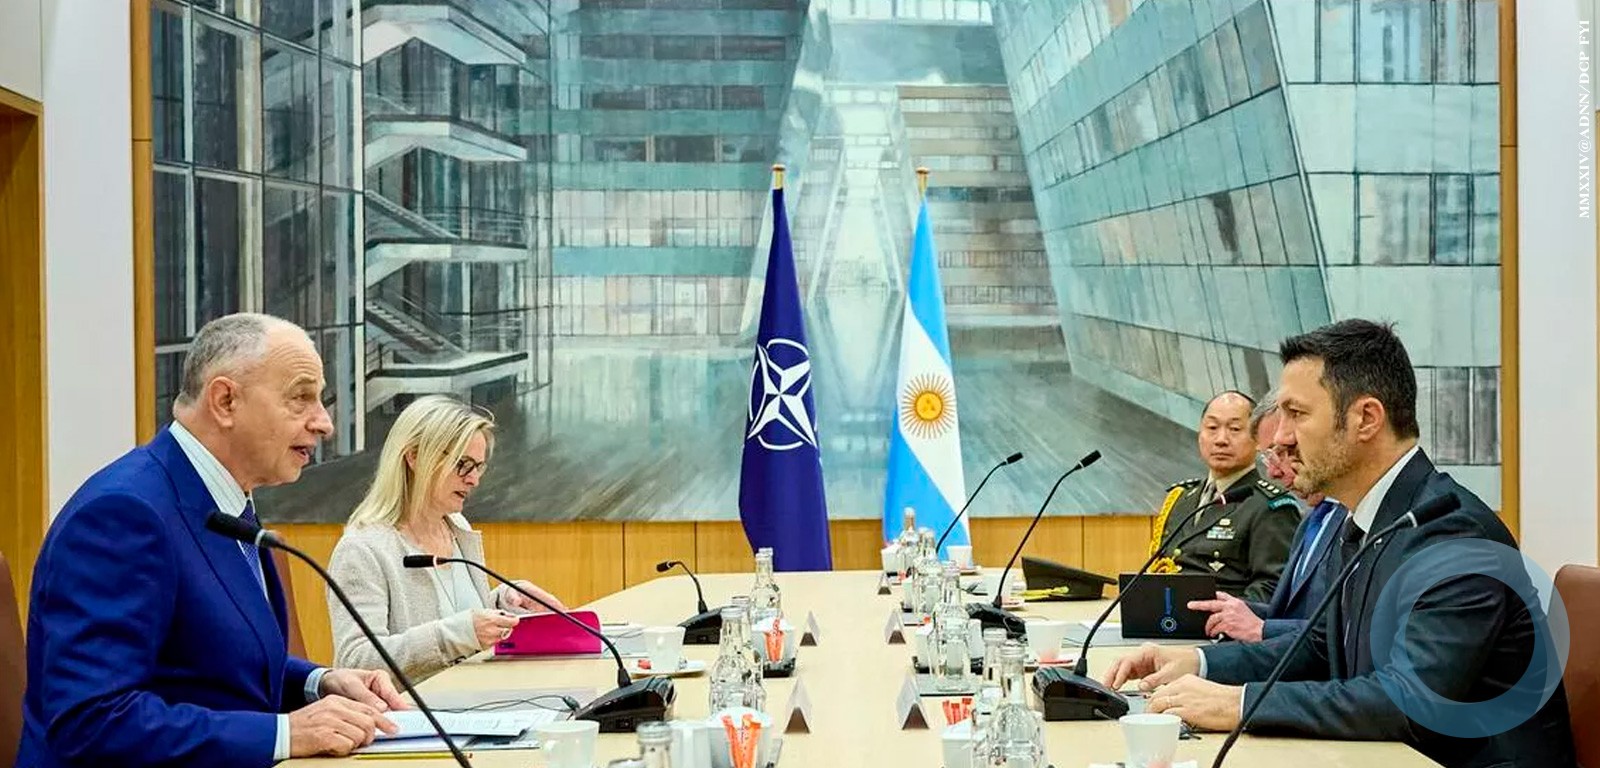 Argentina's Defense Minister, Luis Petri, announced that he had delivered a letter expressing the country's request to become a global NATO partner